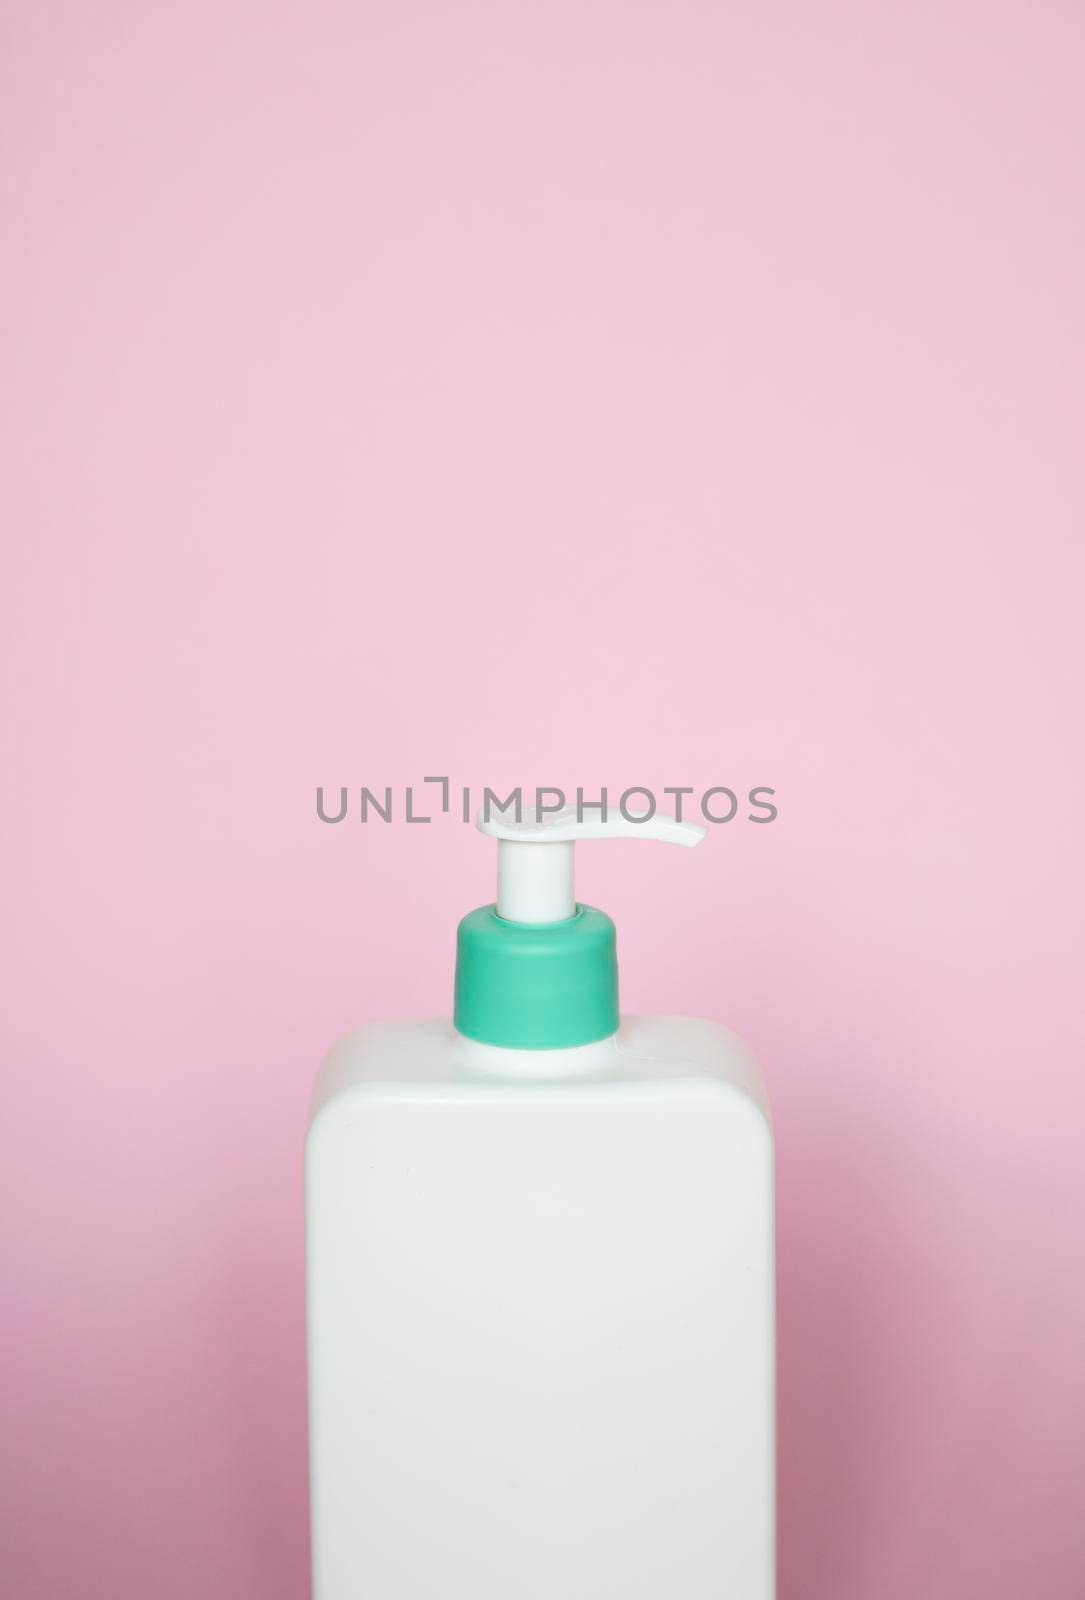 Large white cosmetic plastic bottle with pump dispenser pump and green cap on pink background. Liquid container for gel, lotion, cream, shampoo, bath foam